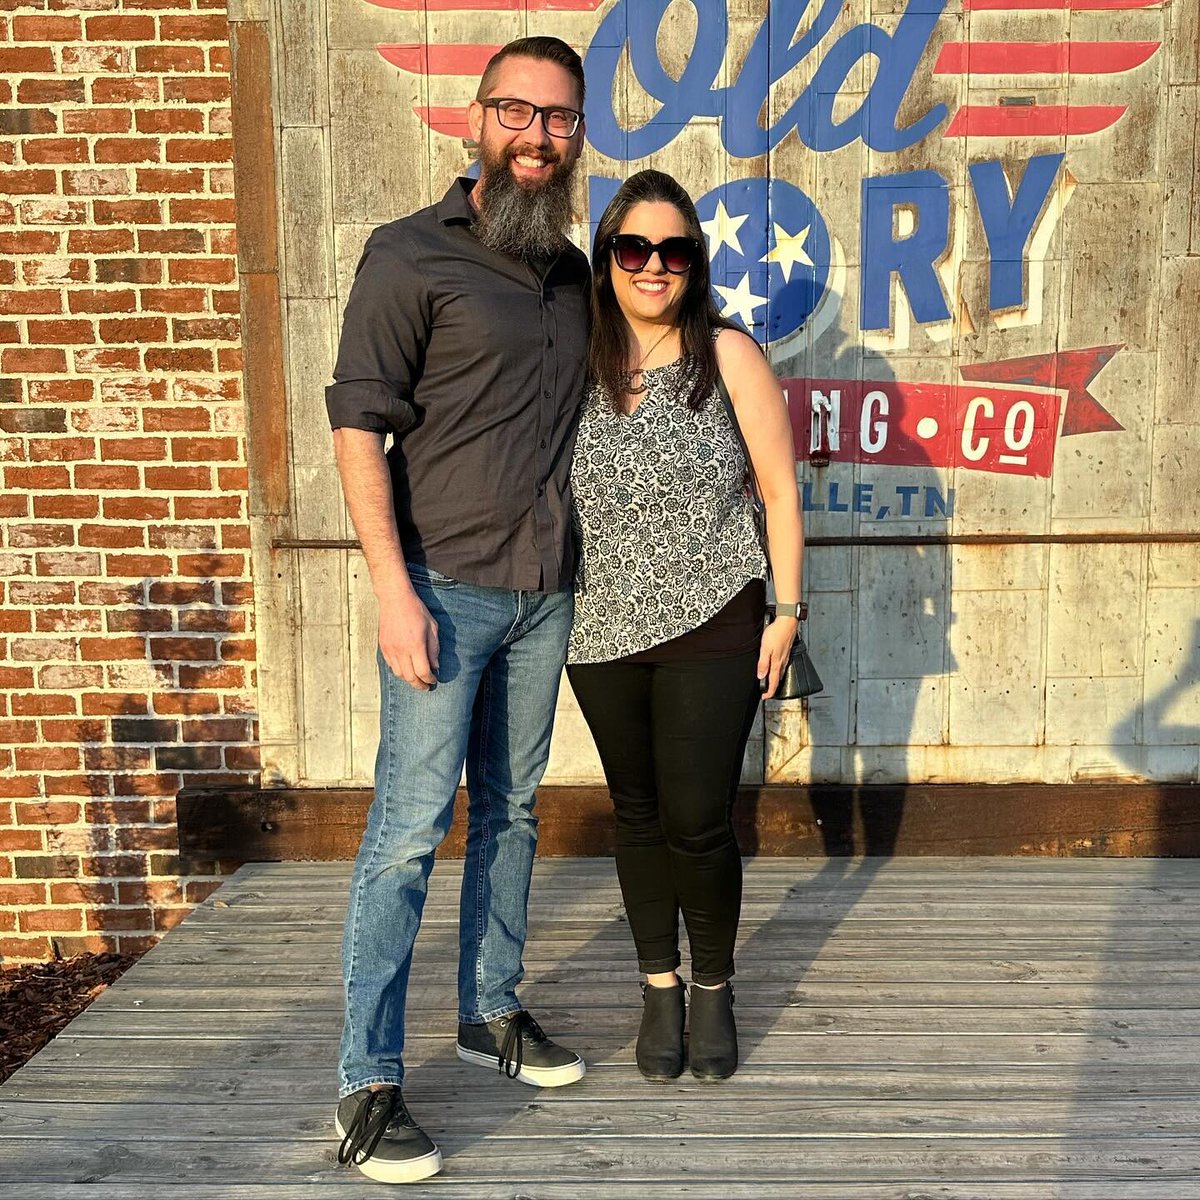 Have you checked out the #new Restaurant at Old Glory or Silo Park yet? Remember to tag us in your photos when you visit! 📷: @coach_mark #newrestaurant #distillery #restaurants #food #goodeats #craftspirits #onlyinclarksvilletn #visitclarksvilletn